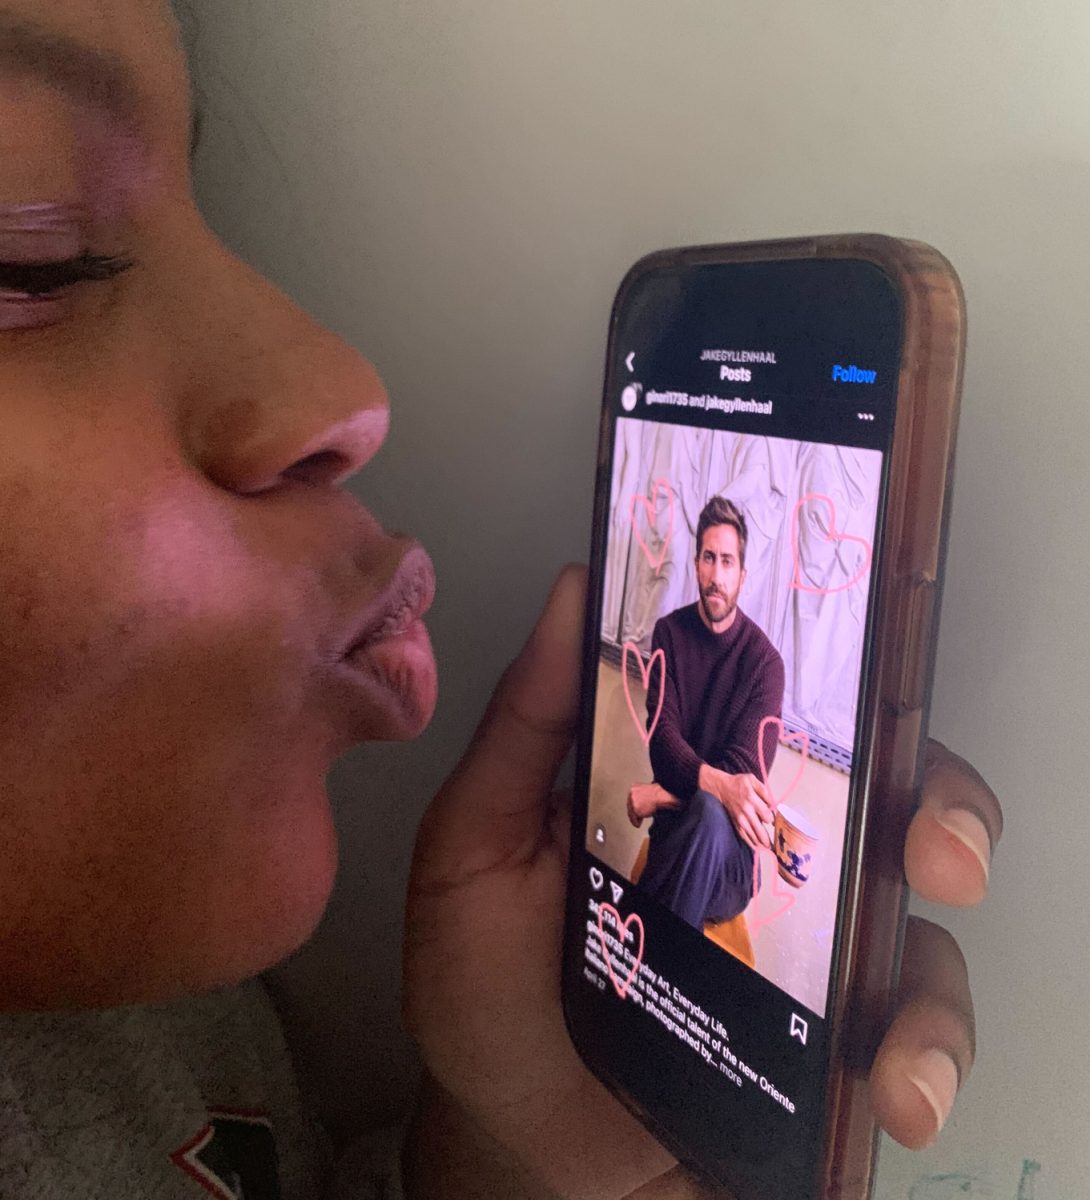 Heights Herald A&E Editor proudly displays her parasocial relationship with Hollywood actor Jake Gyllenhaal; Kadence Hanson argues there is a healthy form of this kind of celebrity obsession, though the line can easily be crossed.